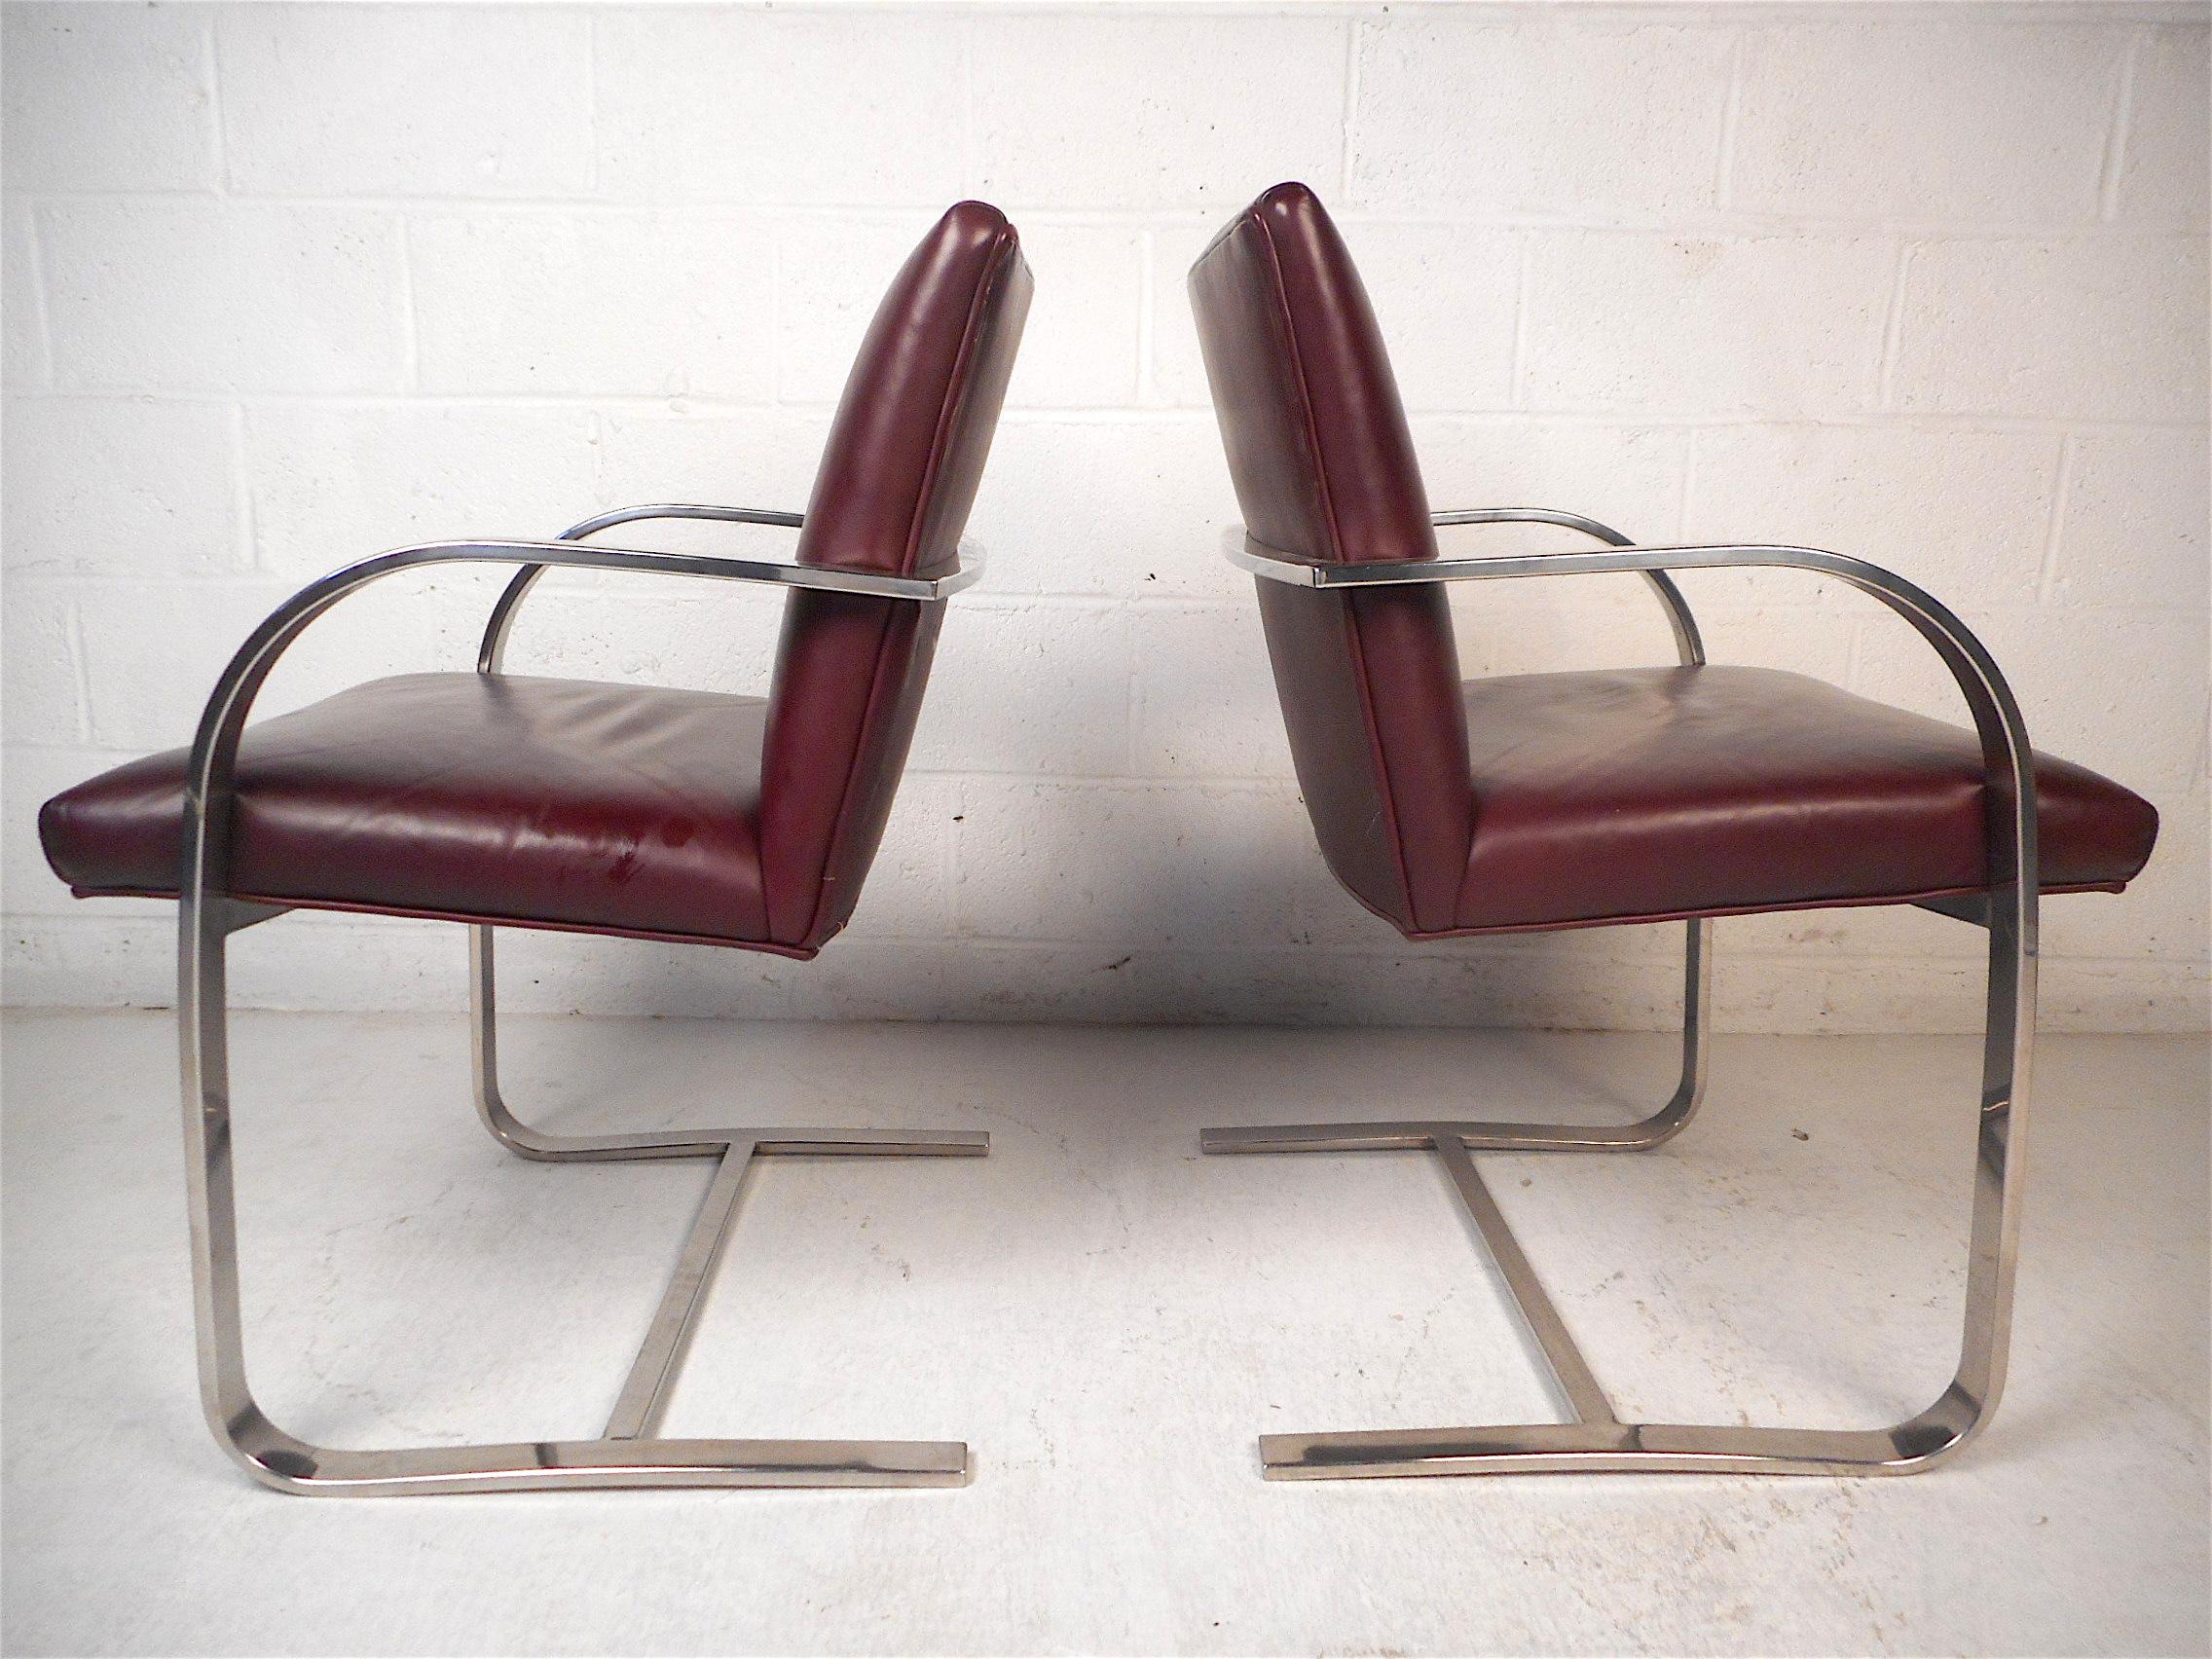 Late 20th Century Pair of Mid-Century Cantilever Chairs